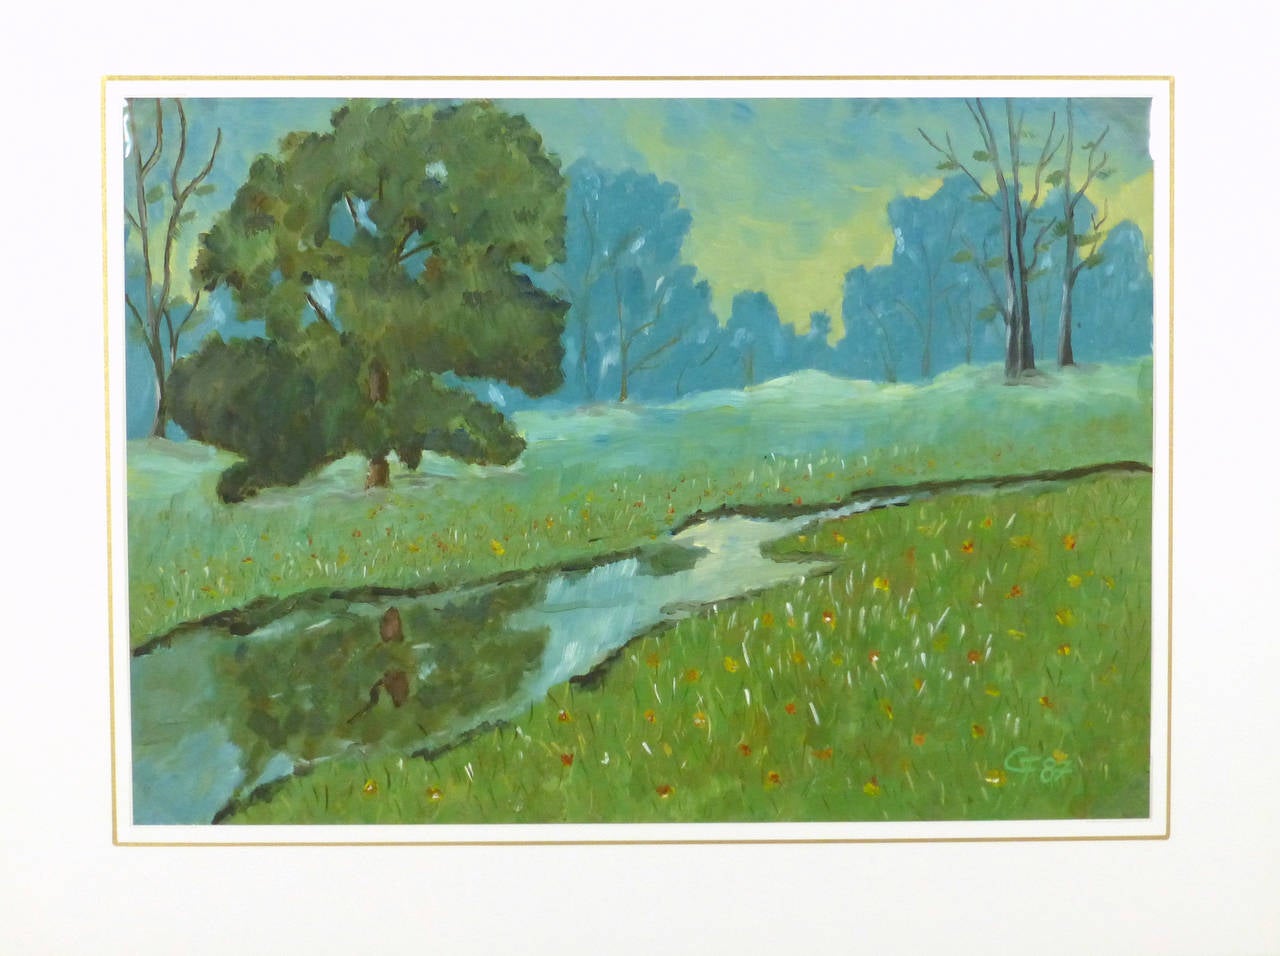 Tranquil, dream-like acrylic landscape of a shimmering creek winding through a flower-dotted meadow at dusk, 1987. Artist unknown. Initialed 